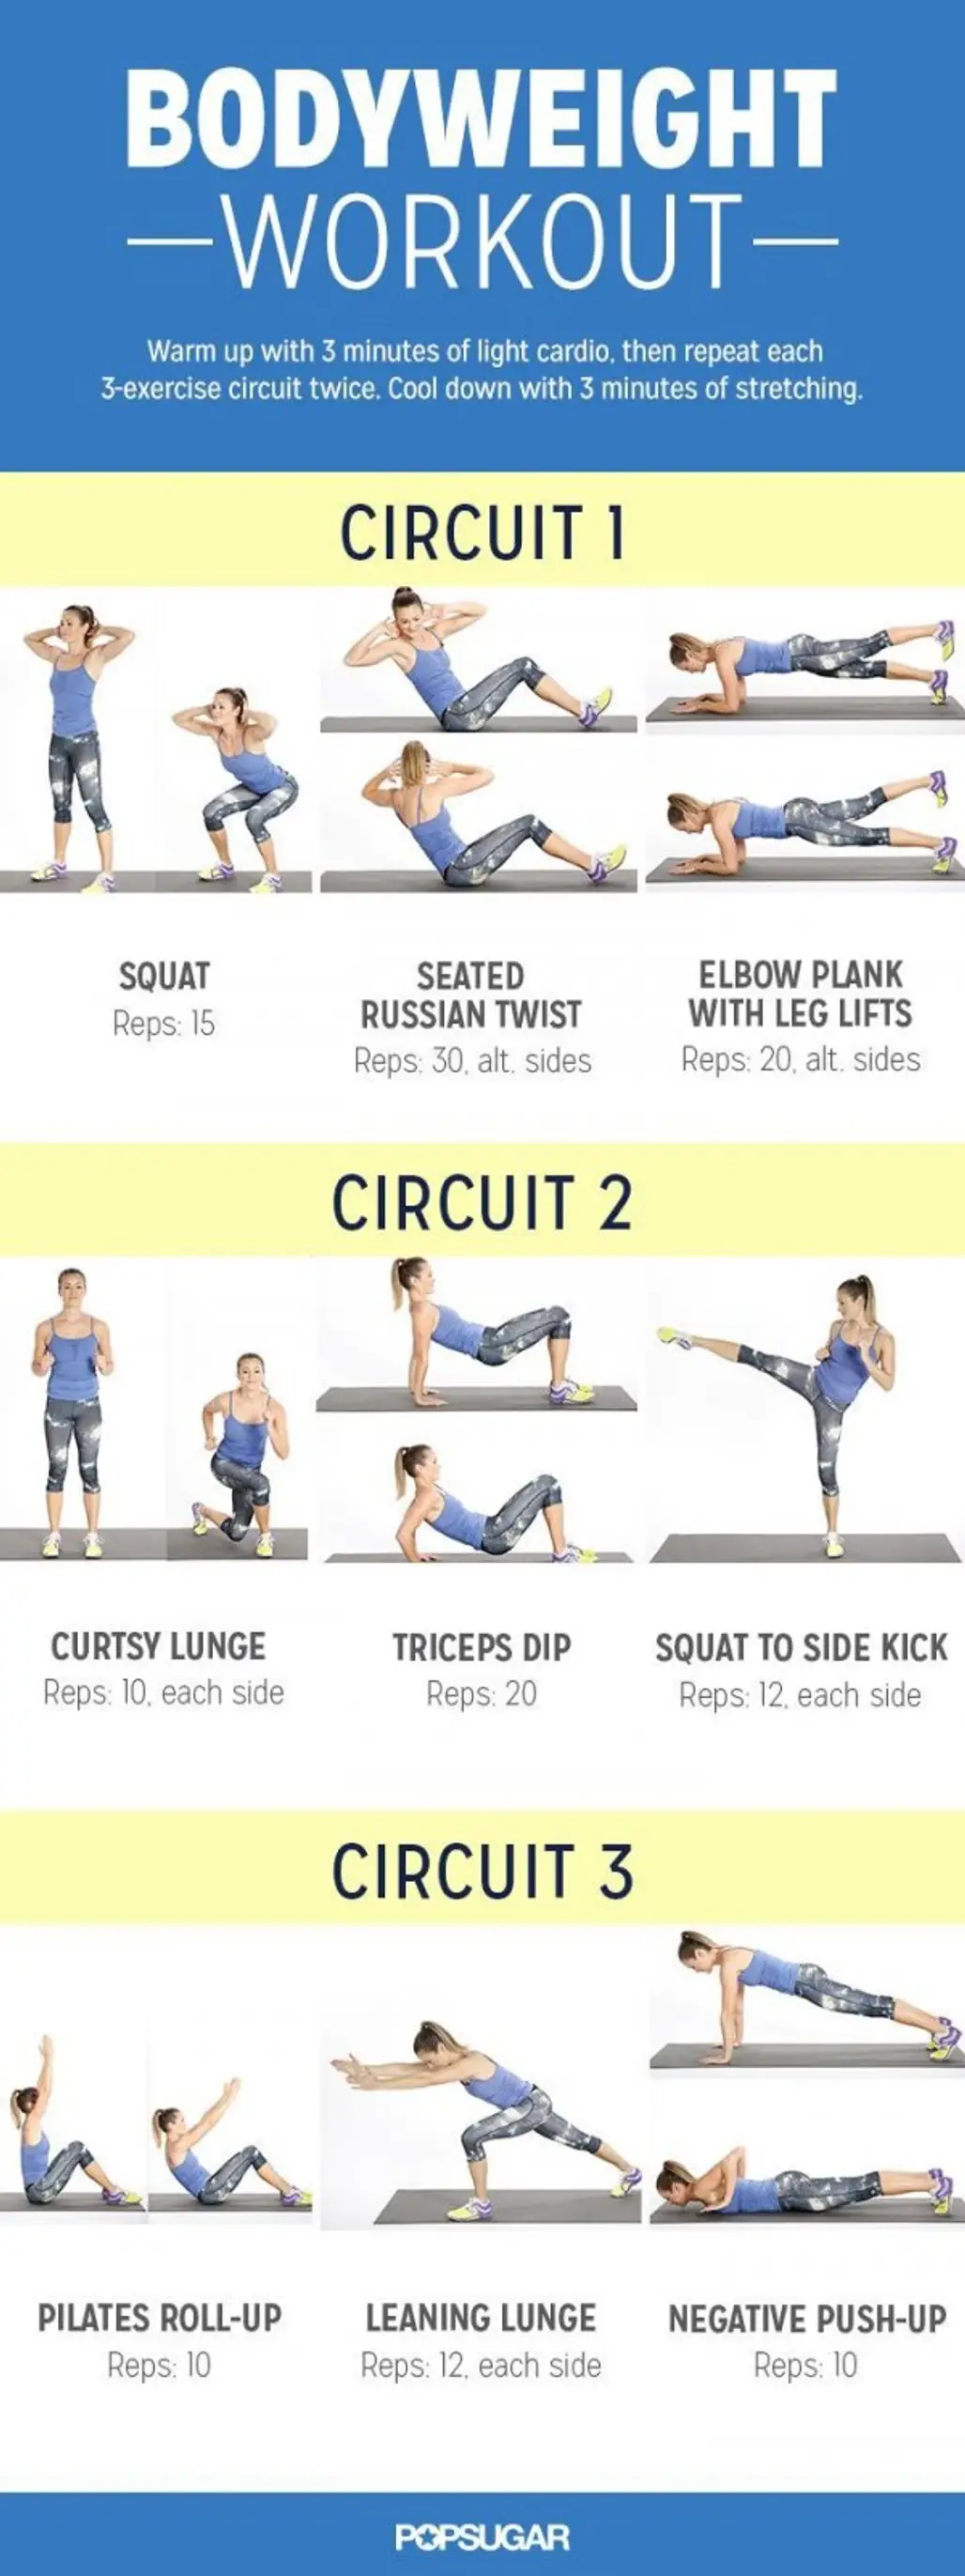 3 Circuits to Try!